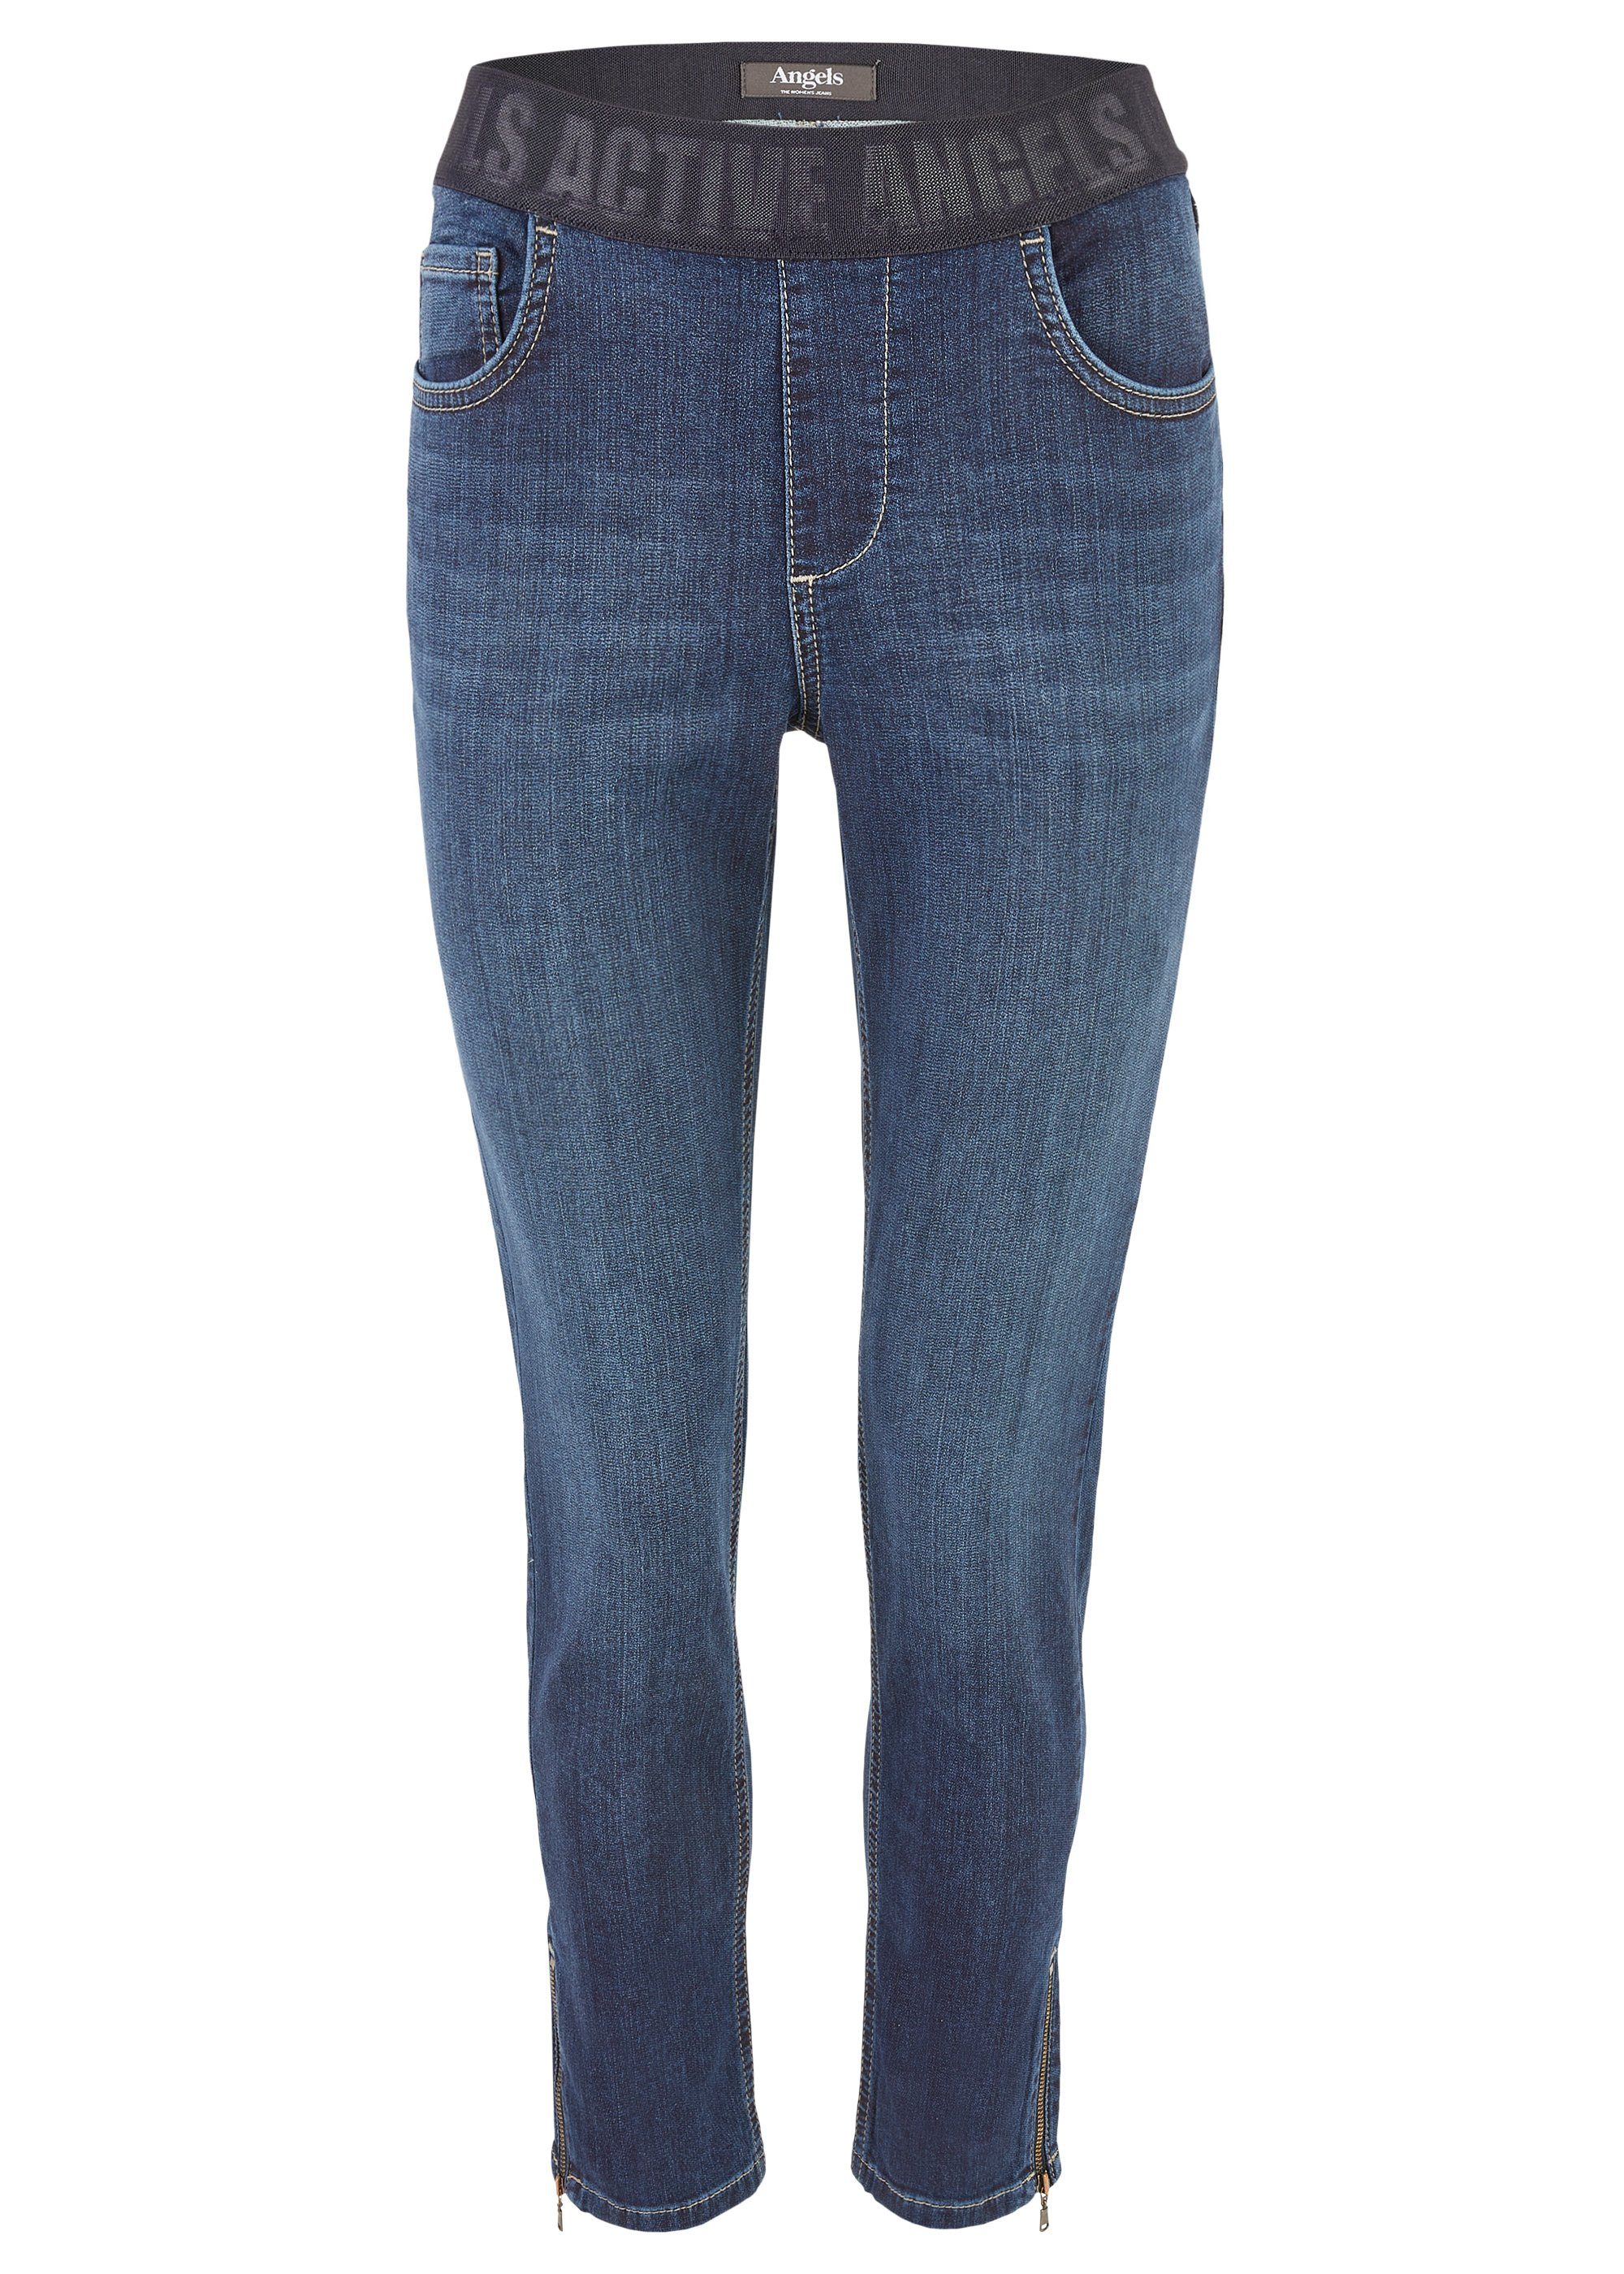 SHAPE night - Stretch-Jeans JEANS ANGELS ZIP 120500.305 STRETCH blue 585 SKINNY used ANGELS